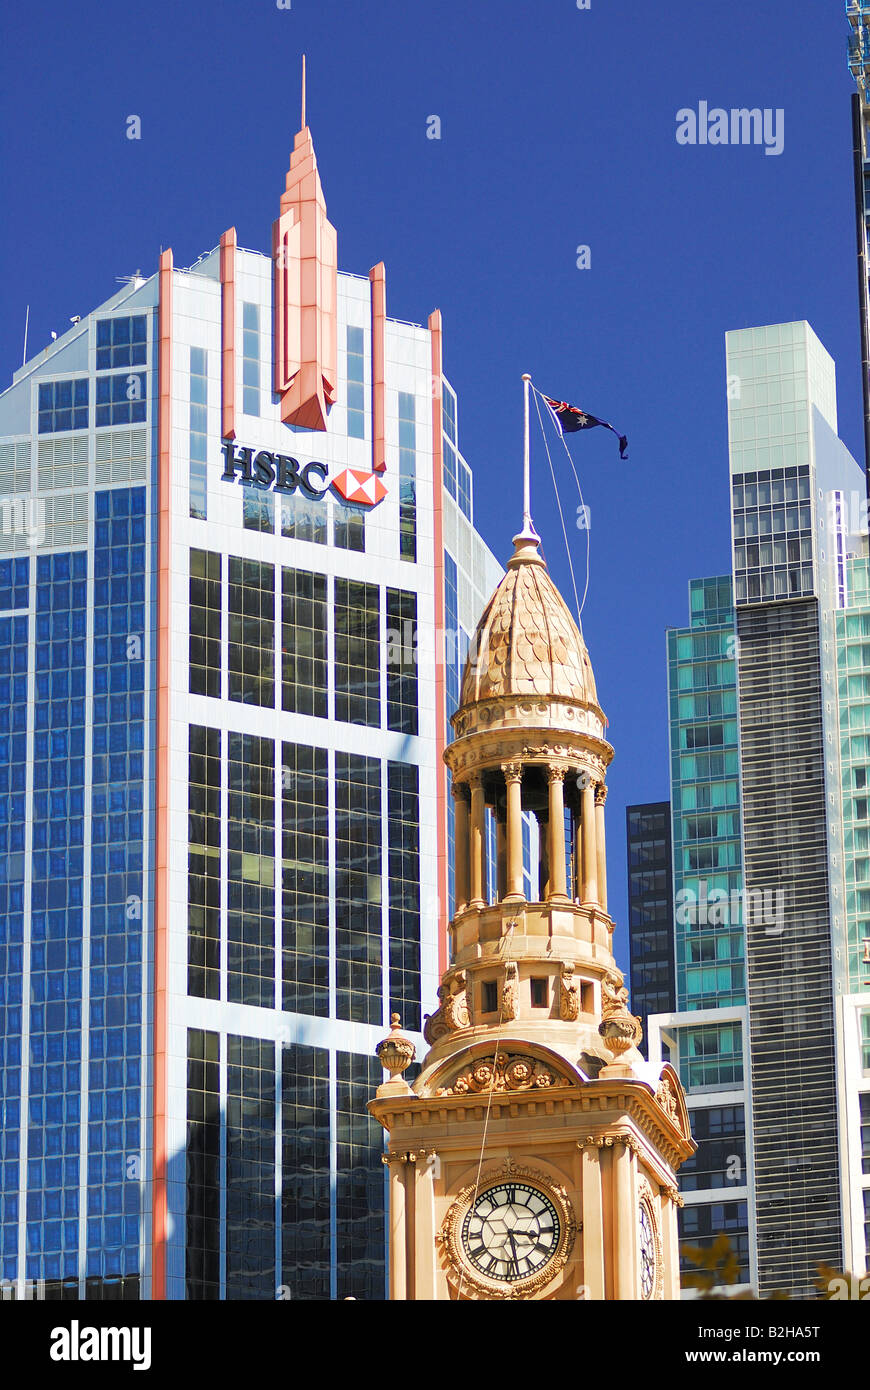 business district HSBC Bank tower city hall skyscraper sydney new south wales australia Stock Photo